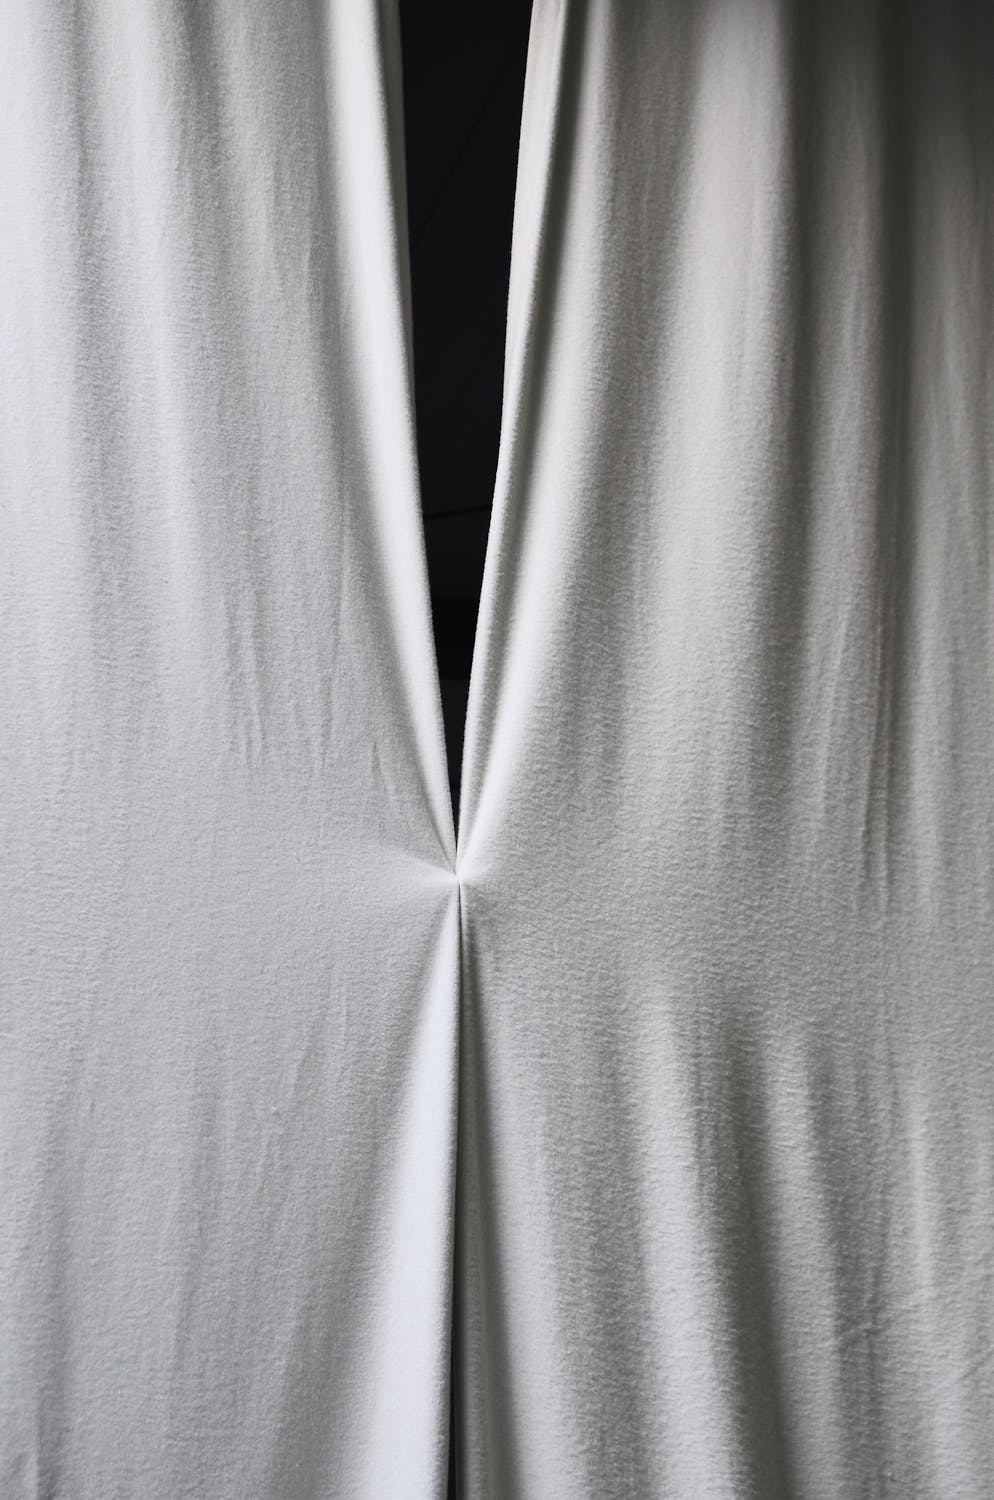 White soft fabric of curtains with creases · Free Stock Photo